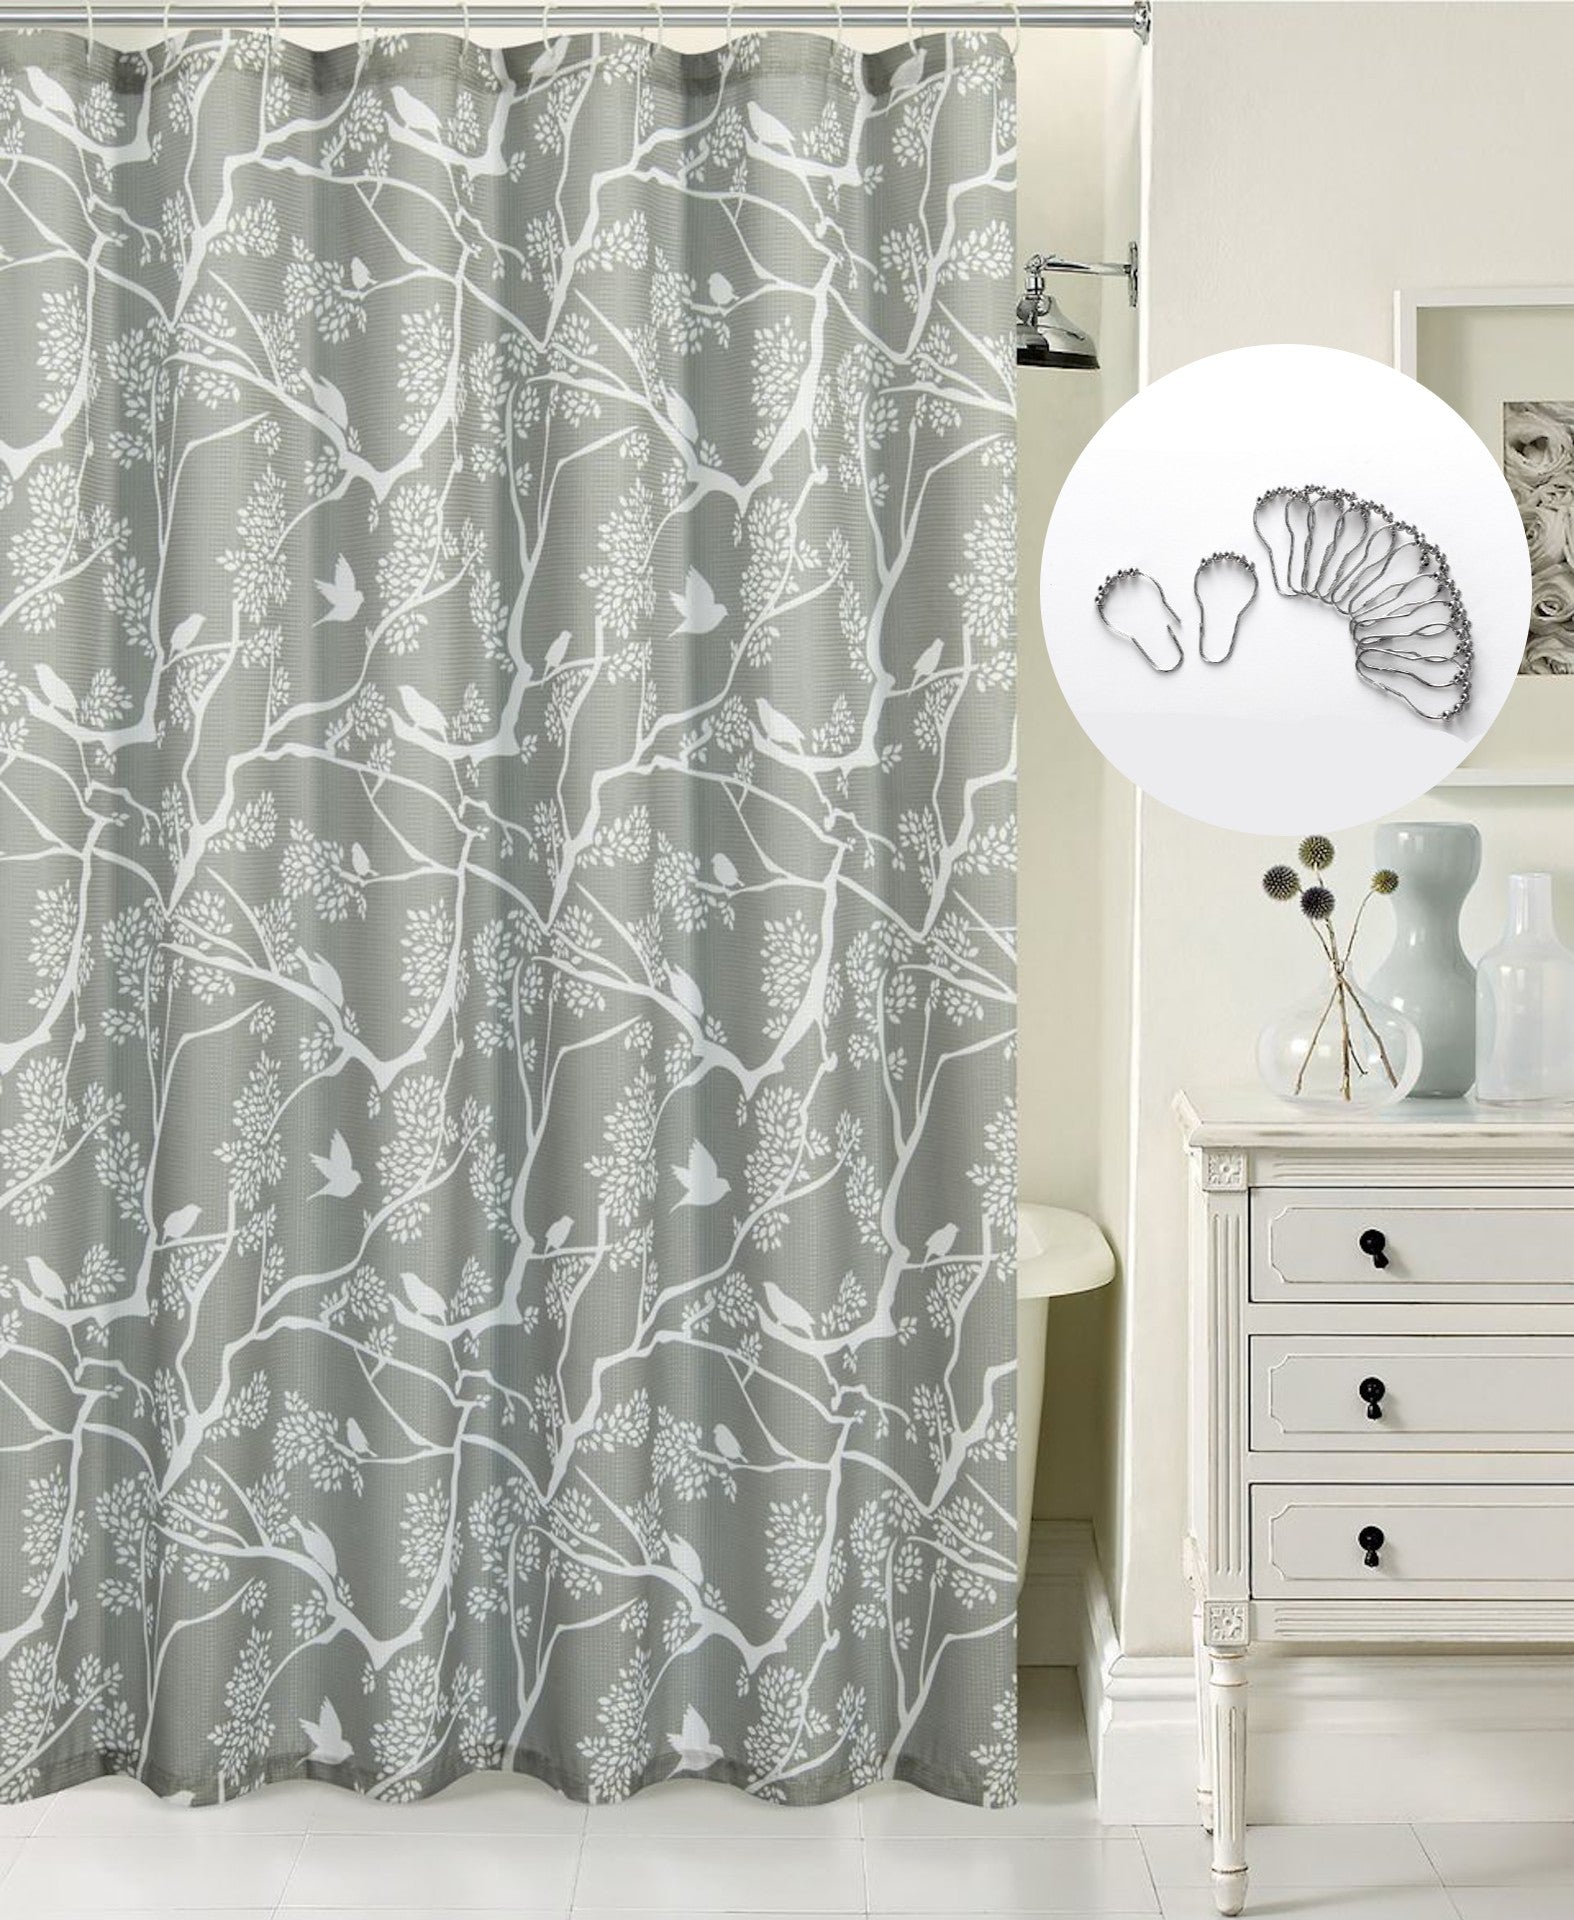 Dainty Home 13 Piece Birds Breeze Printed Waffle Weave Textured Shower Curtain And 12 Metal Rollerball Hooks